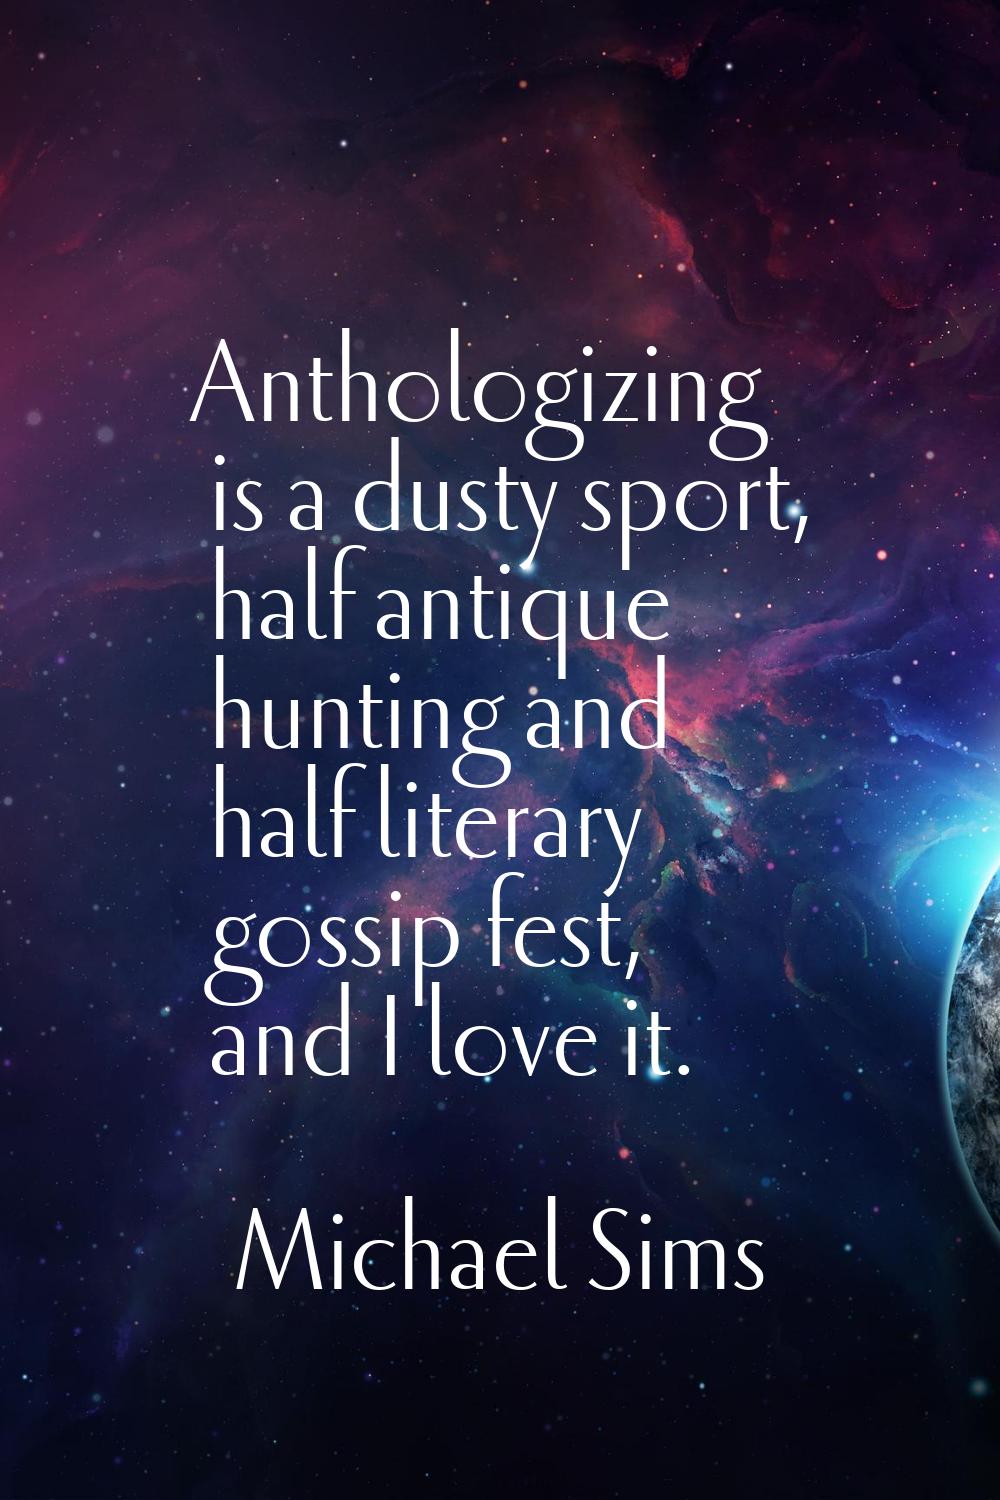 Anthologizing is a dusty sport, half antique hunting and half literary gossip fest, and I love it.